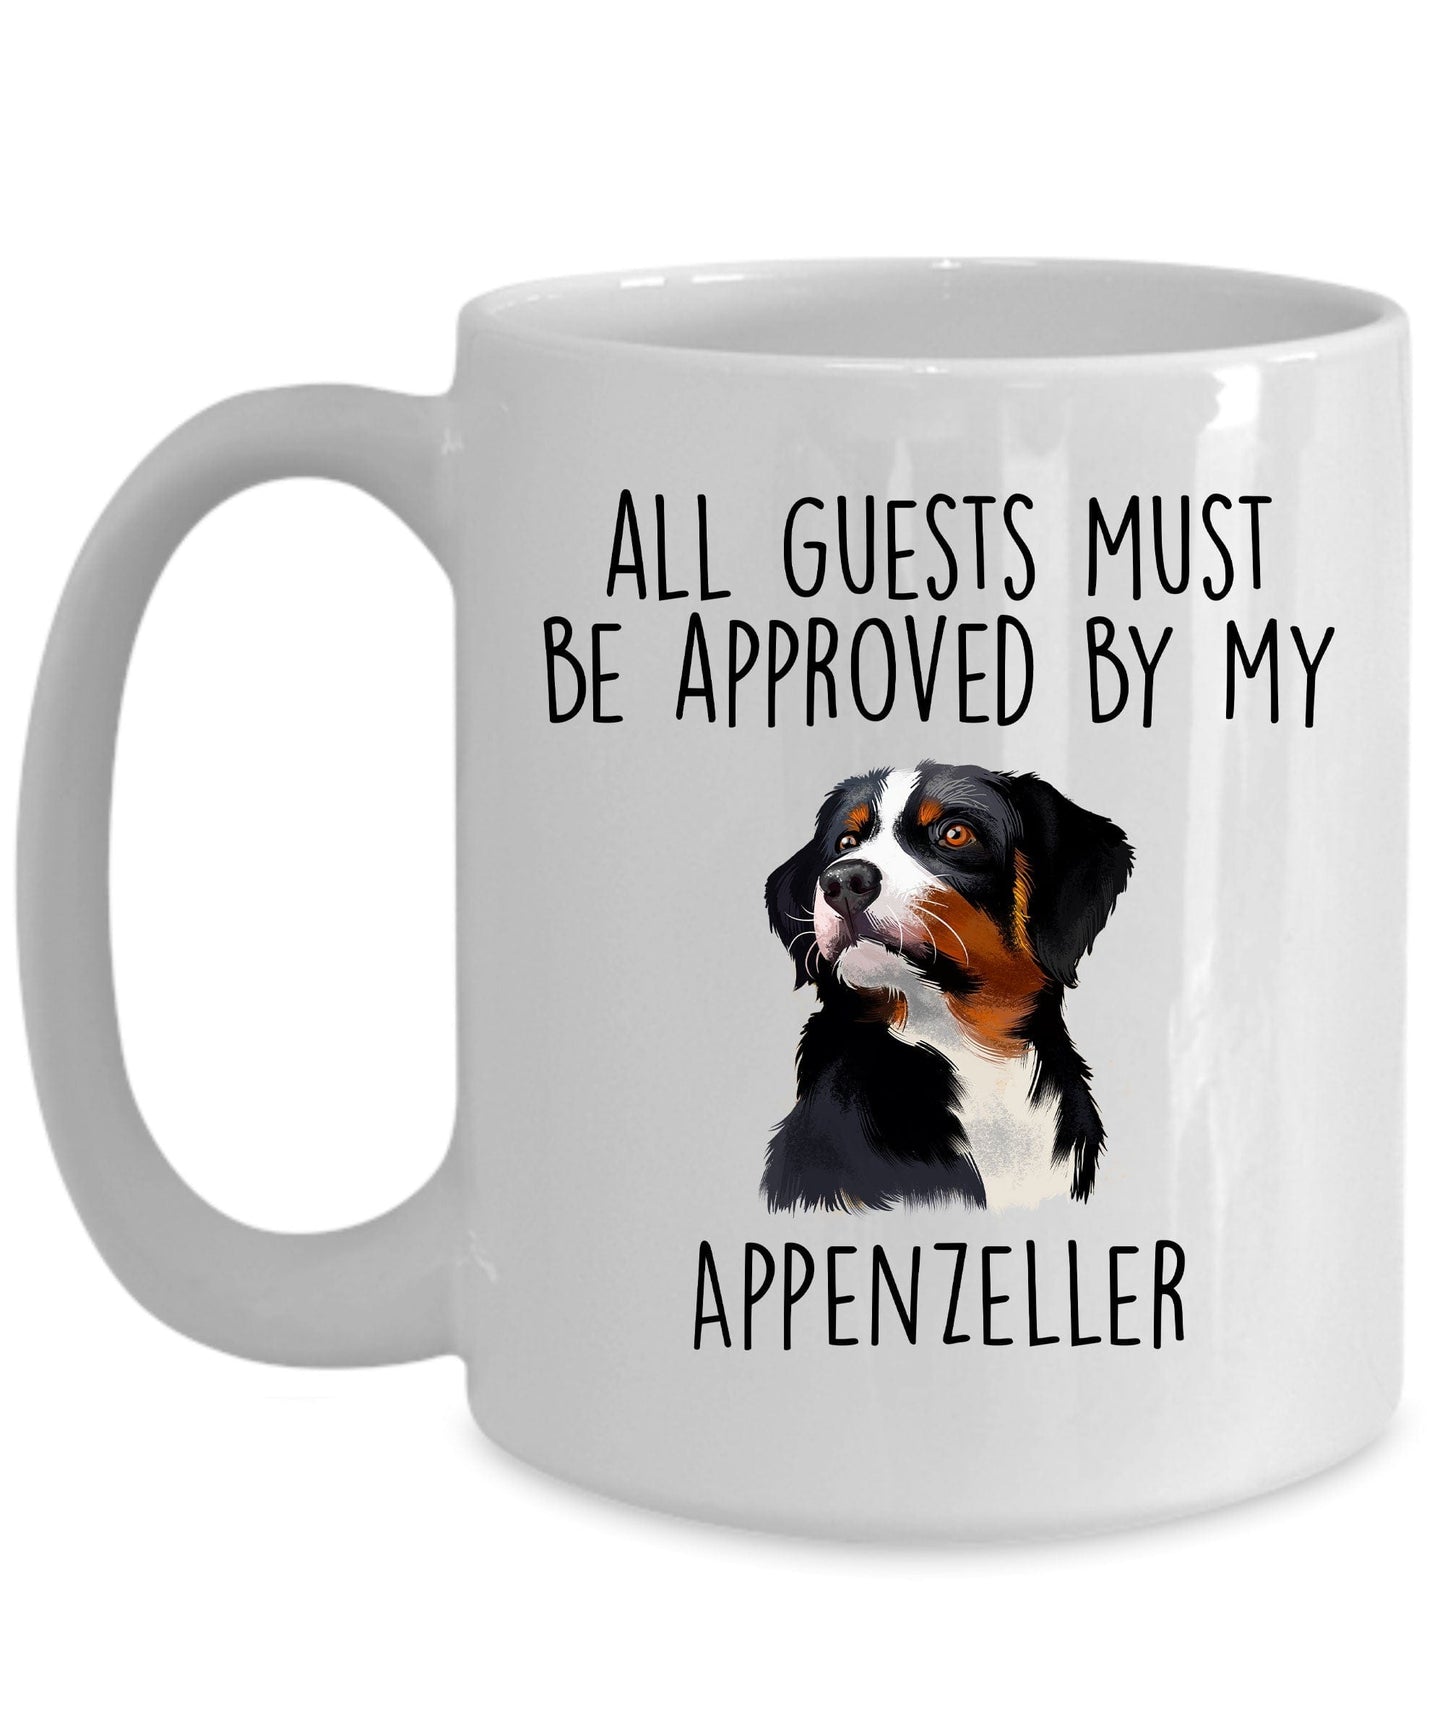 Funny Appenzeller Sennenhund -Guests must be approved Coffee Mug